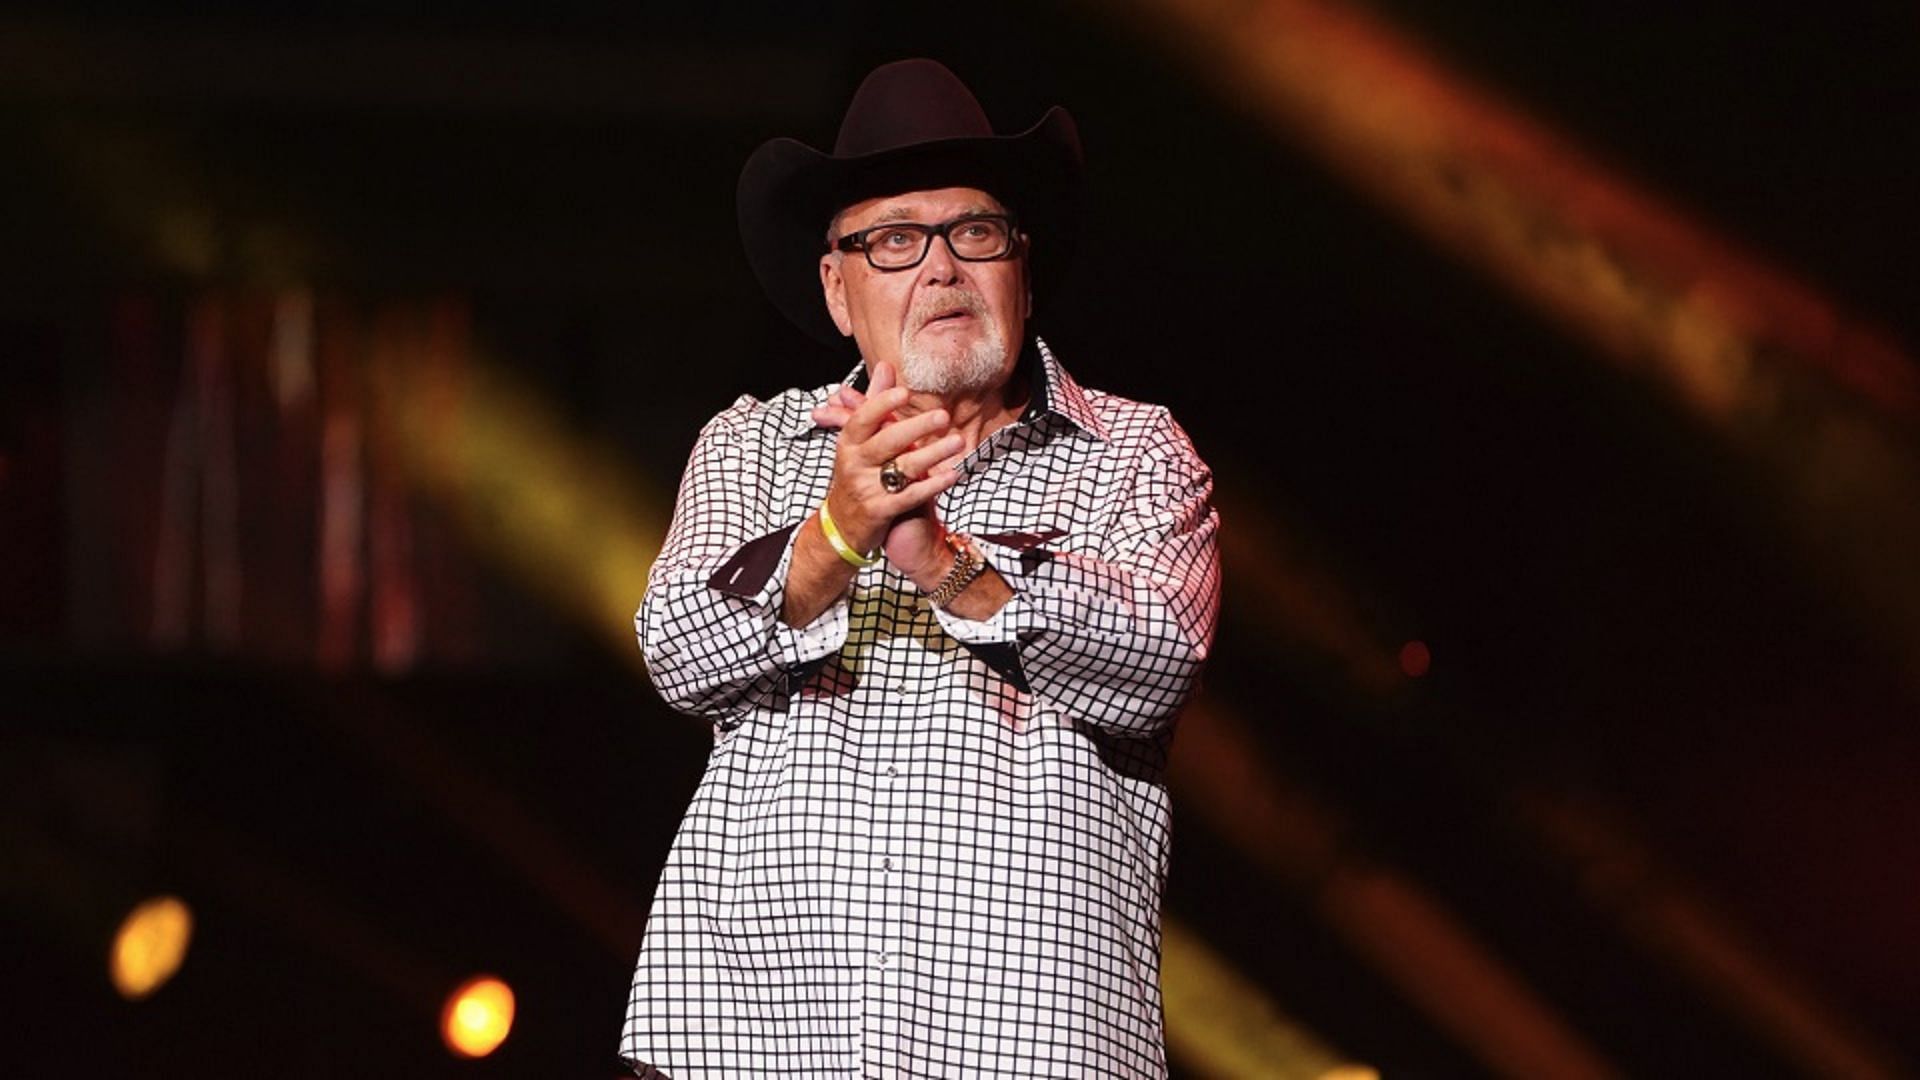 Jim Ross appearing at an AEW event!